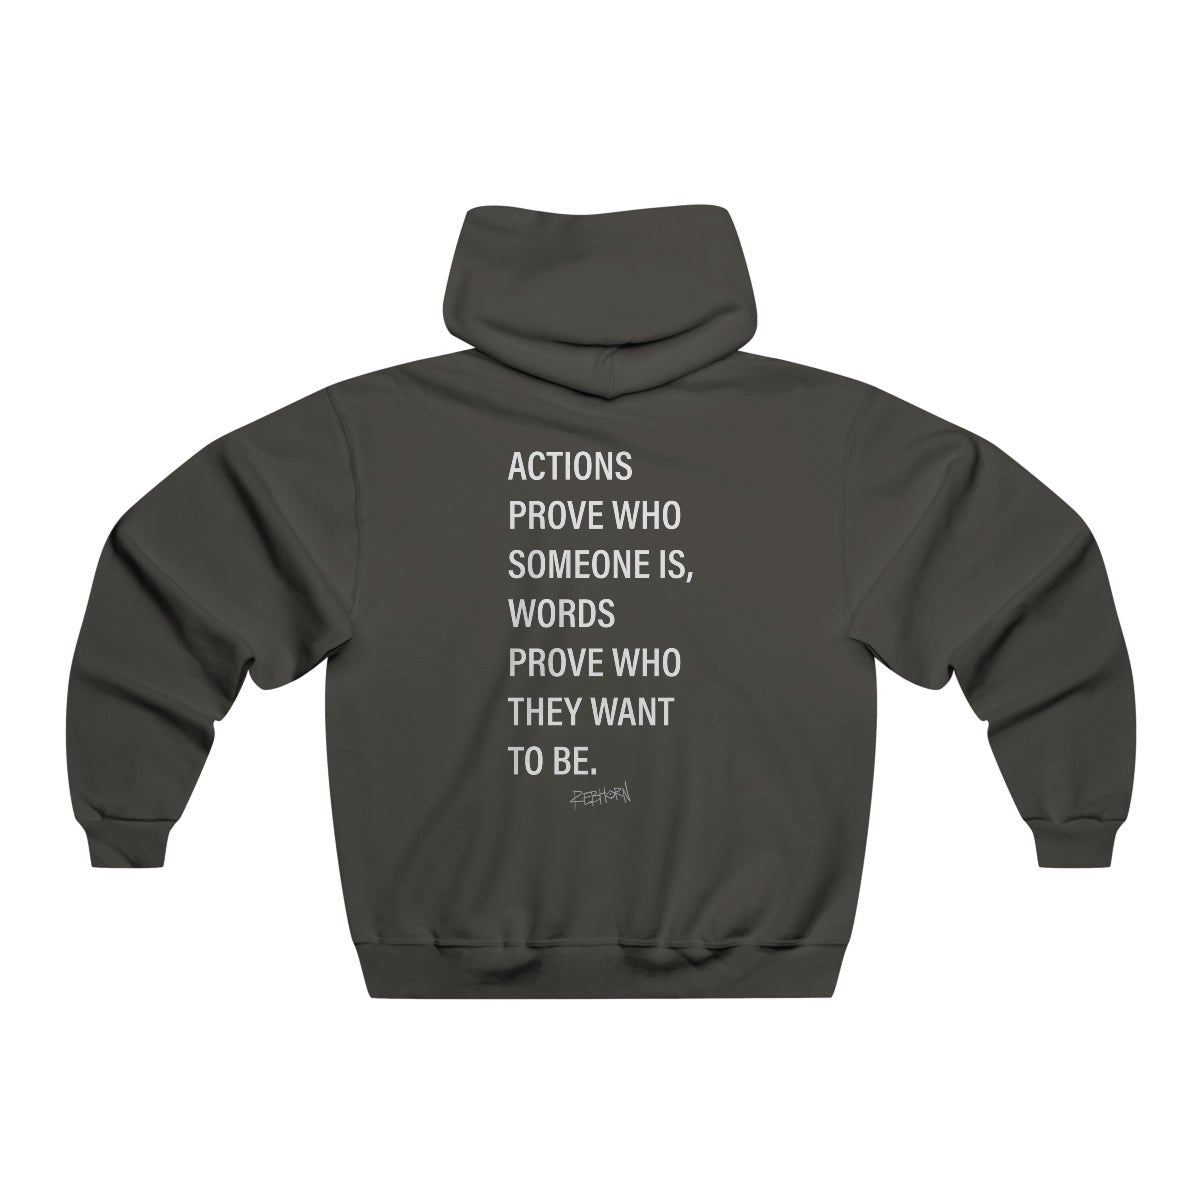 Actions Prove Who Someone Is Hooded Sweatshirt - REBHORN DESIGN